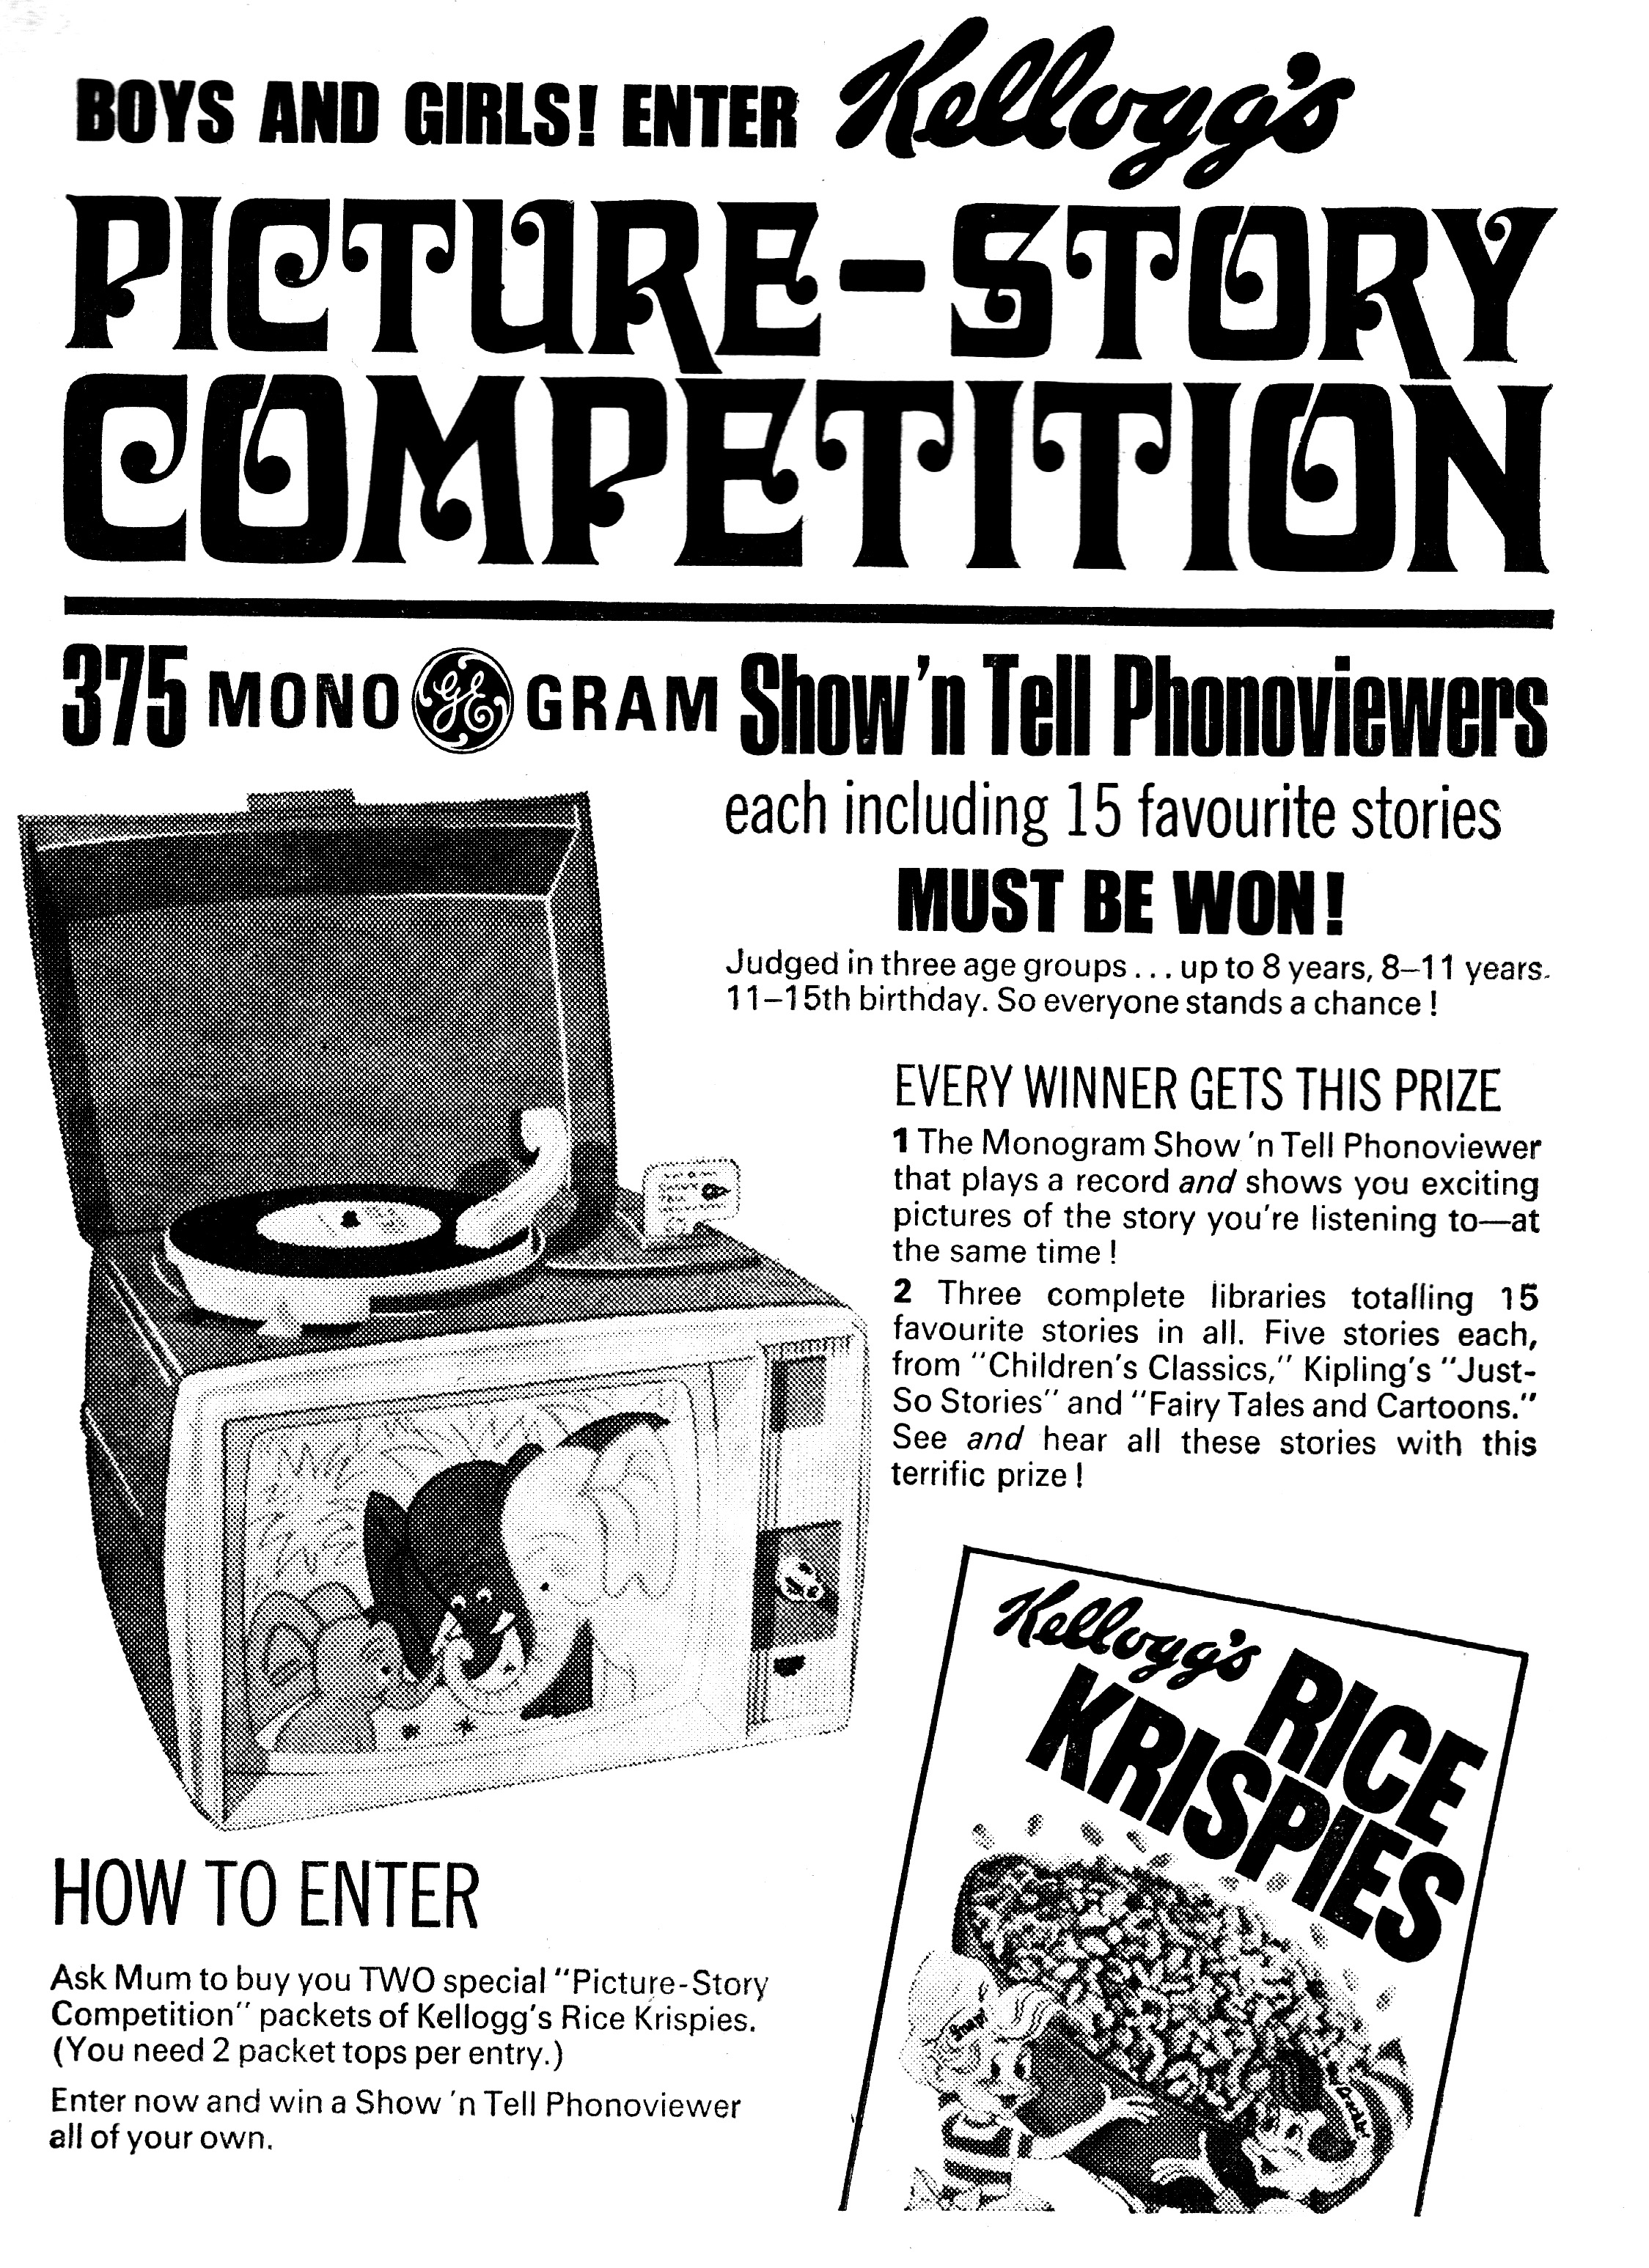 1968 Rice Krispies Picture Story Competition